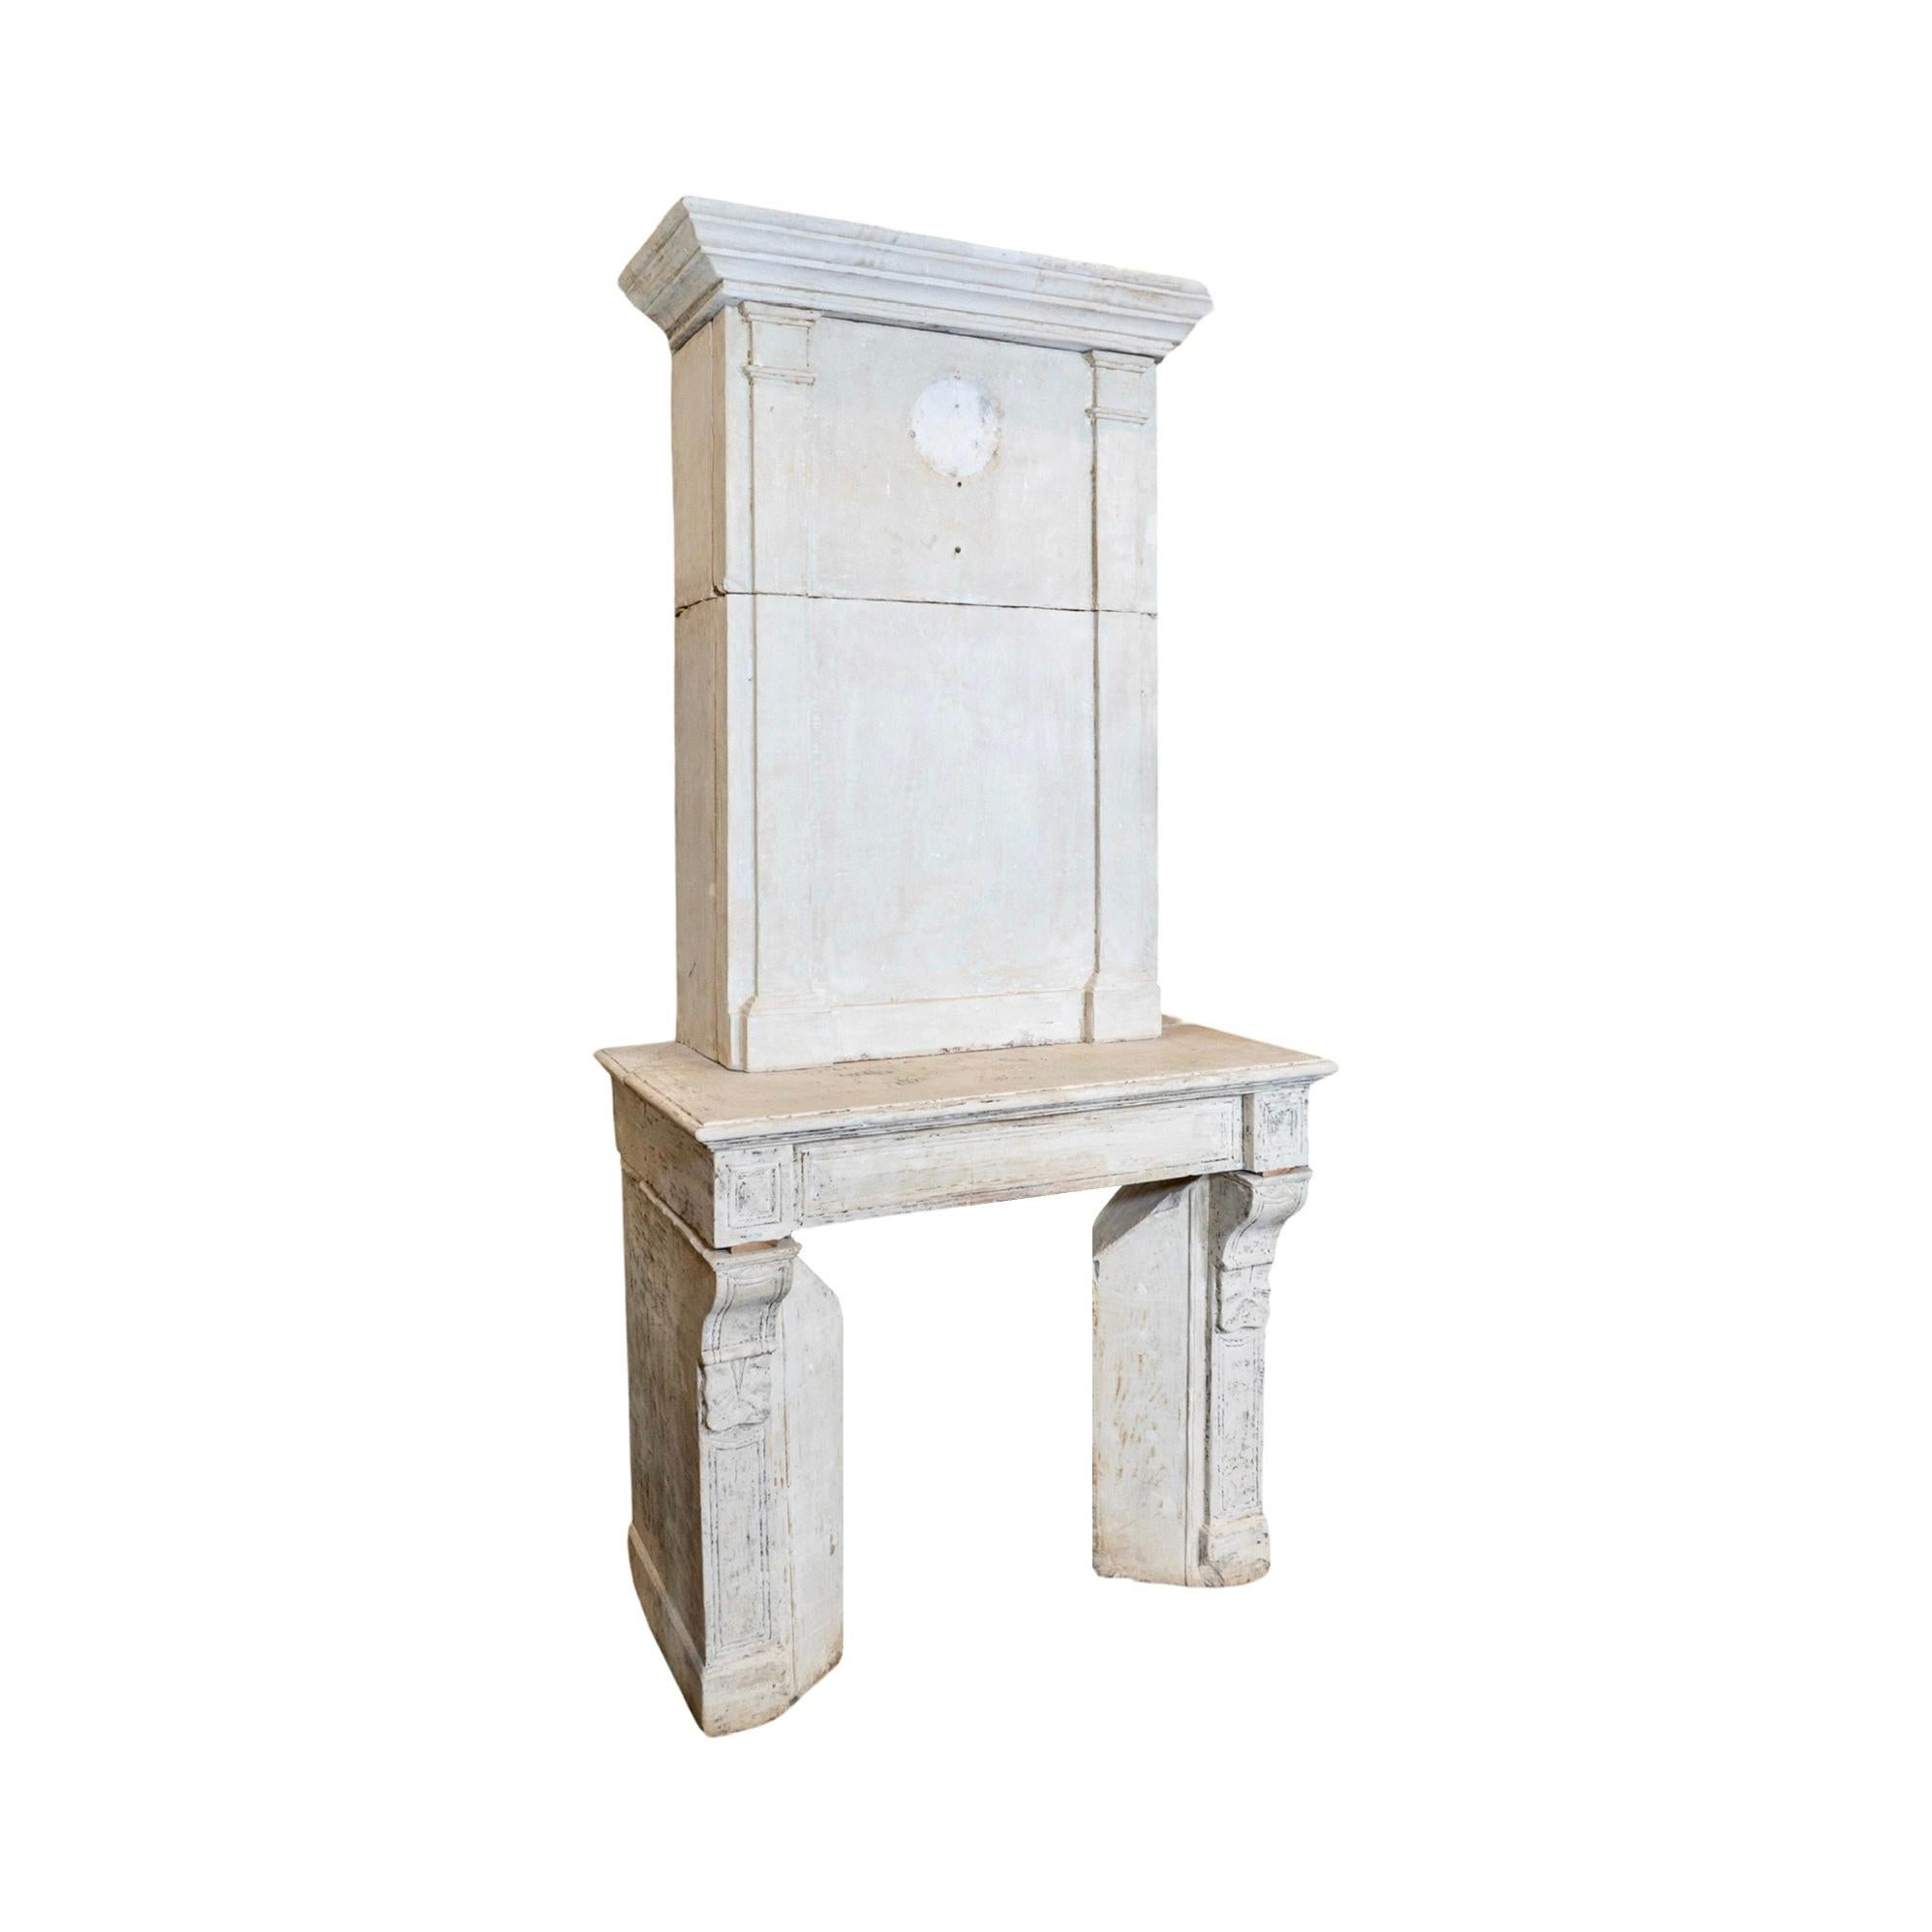 This elegant French Limestone Fireplace, originating from France circa 1820, features intricate line carving details throughout the mantel. Crafted from high-quality limestone, this fireplace will add a touch of sophistication and charm to any